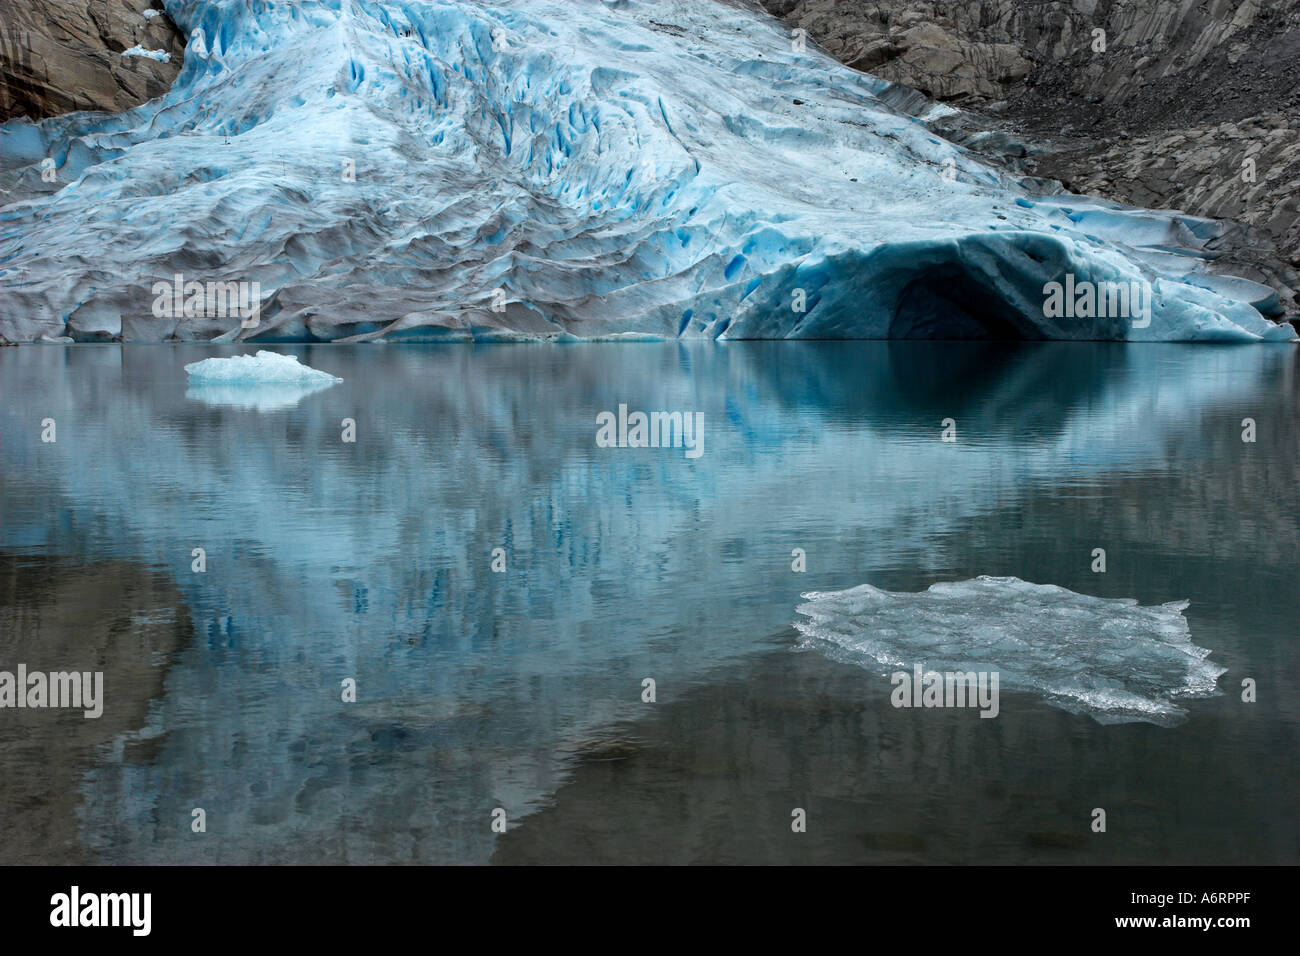 The mouth of the Briksdalbreen glacier in Norway is perfectly reflected in the mirror like glacial pool. Stock Photo